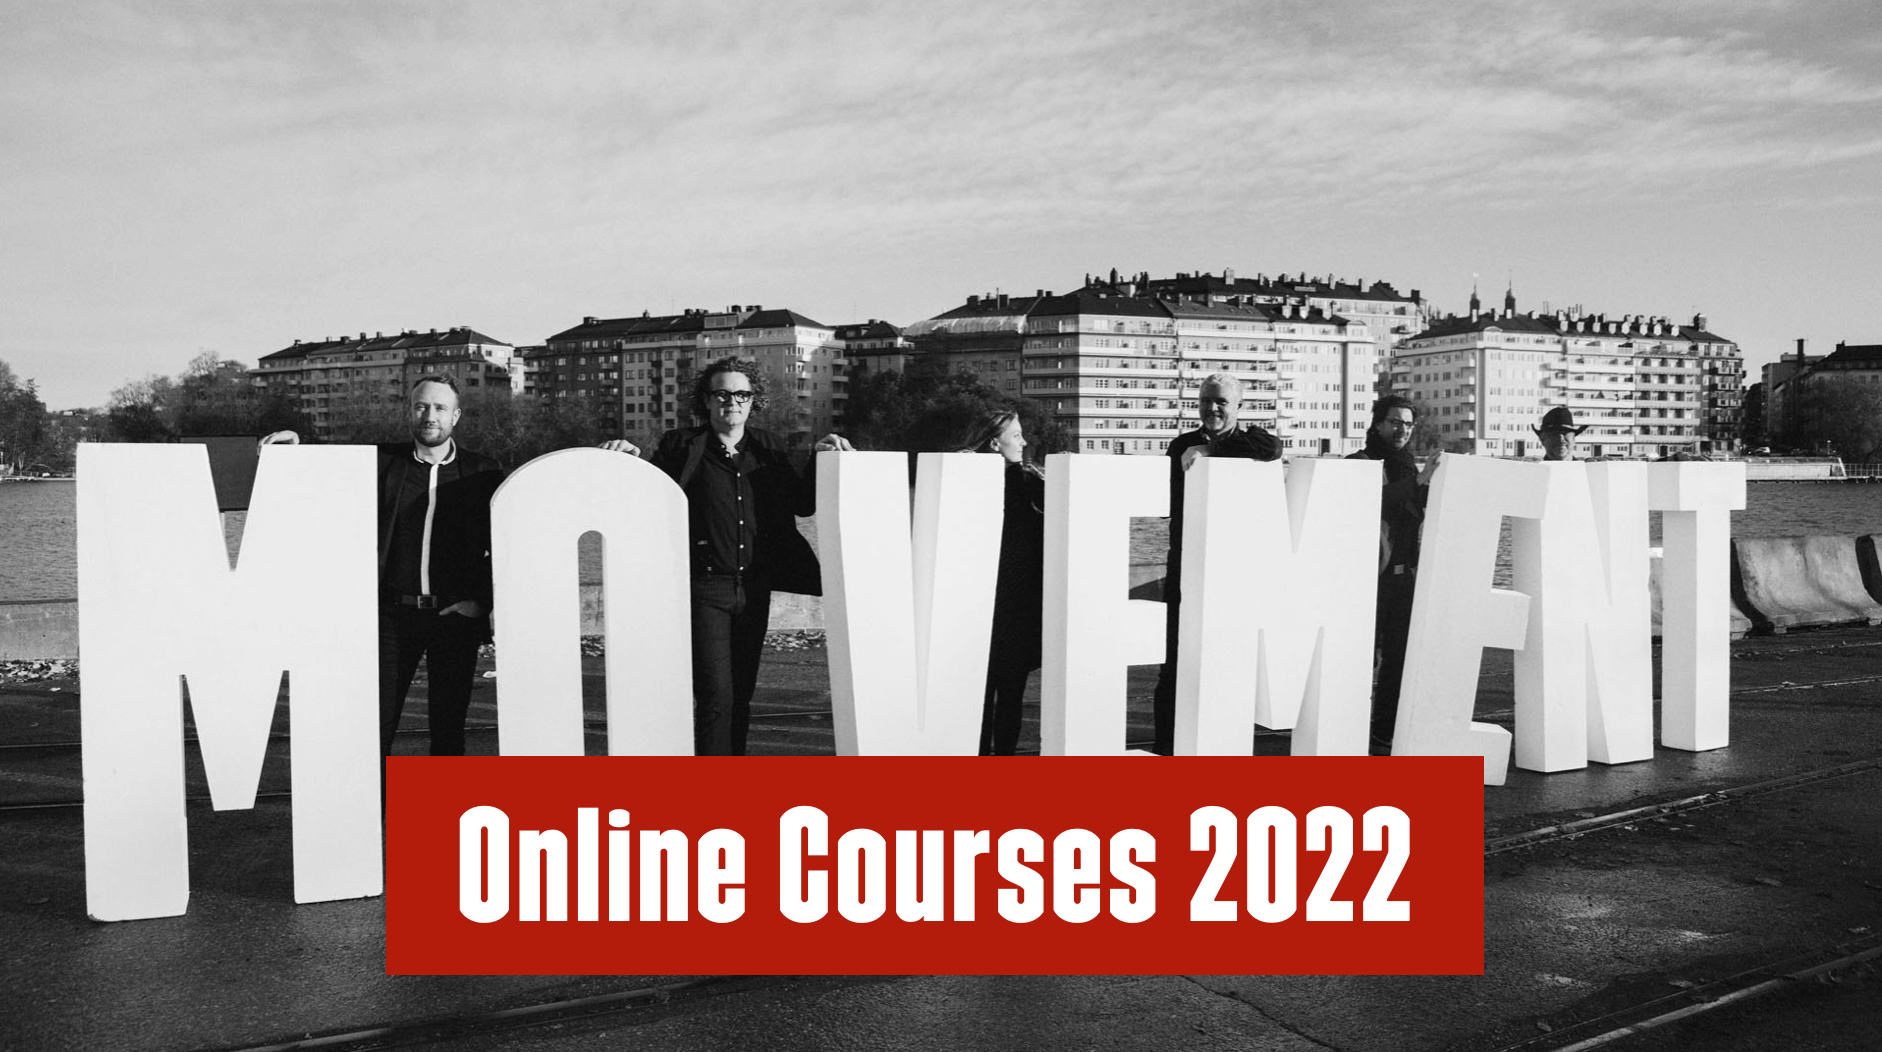 Online courses and events 2022